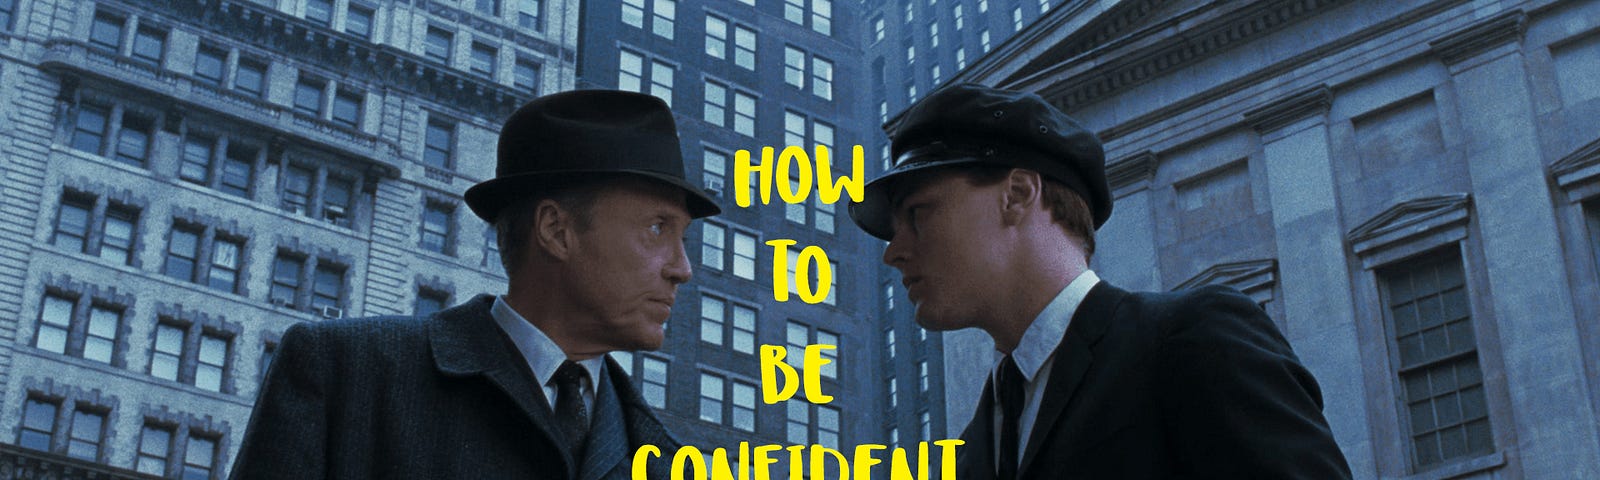 How to be Confident like Frank Abagnale (understanding the mind of a con artist)